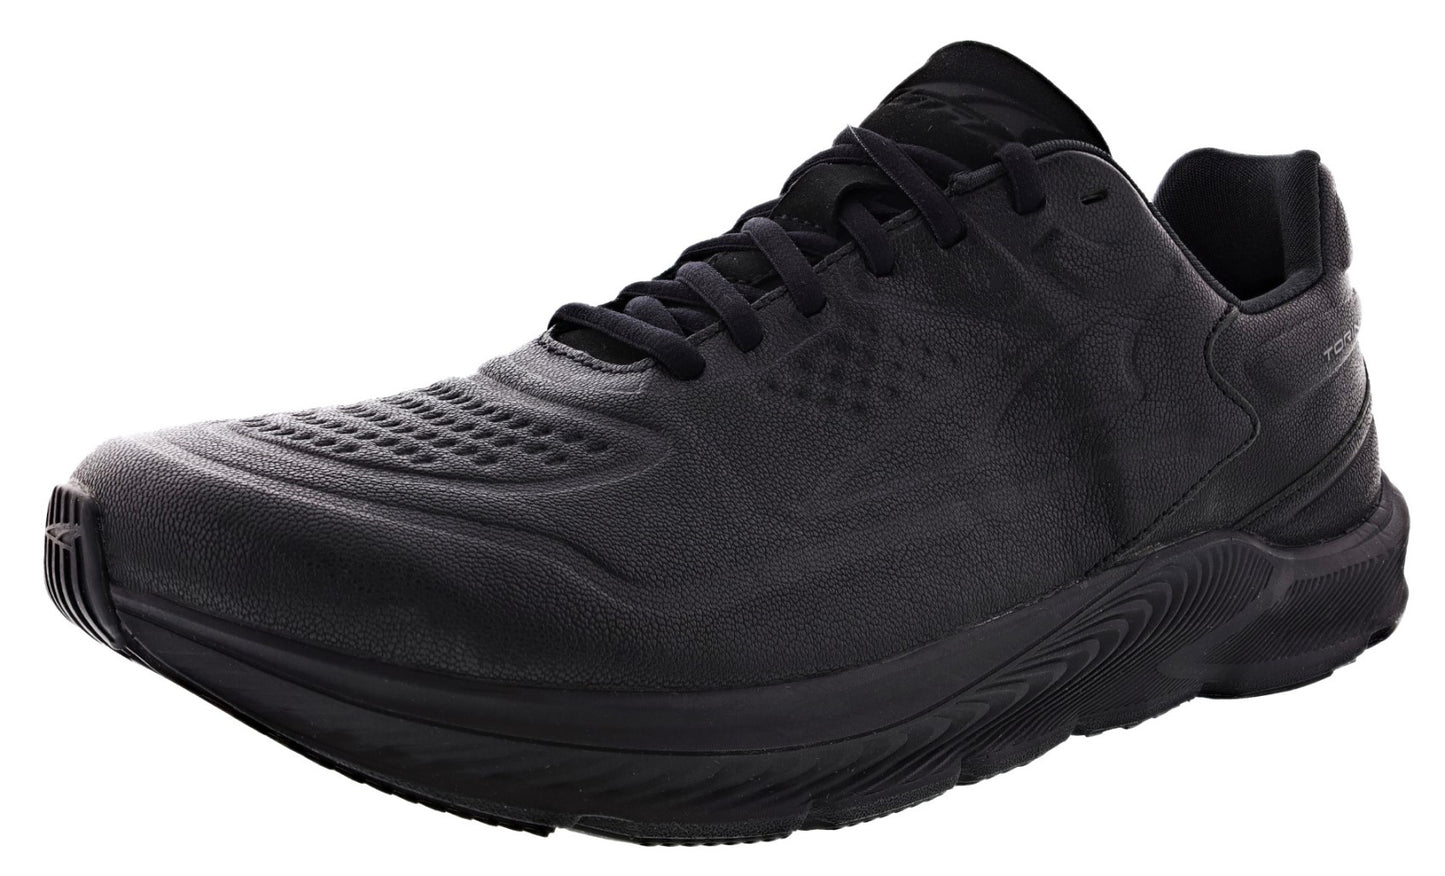 Lateral of Black Altra Men’s Torin 5 Leather Lightweight Slip Resistant Work Shoes